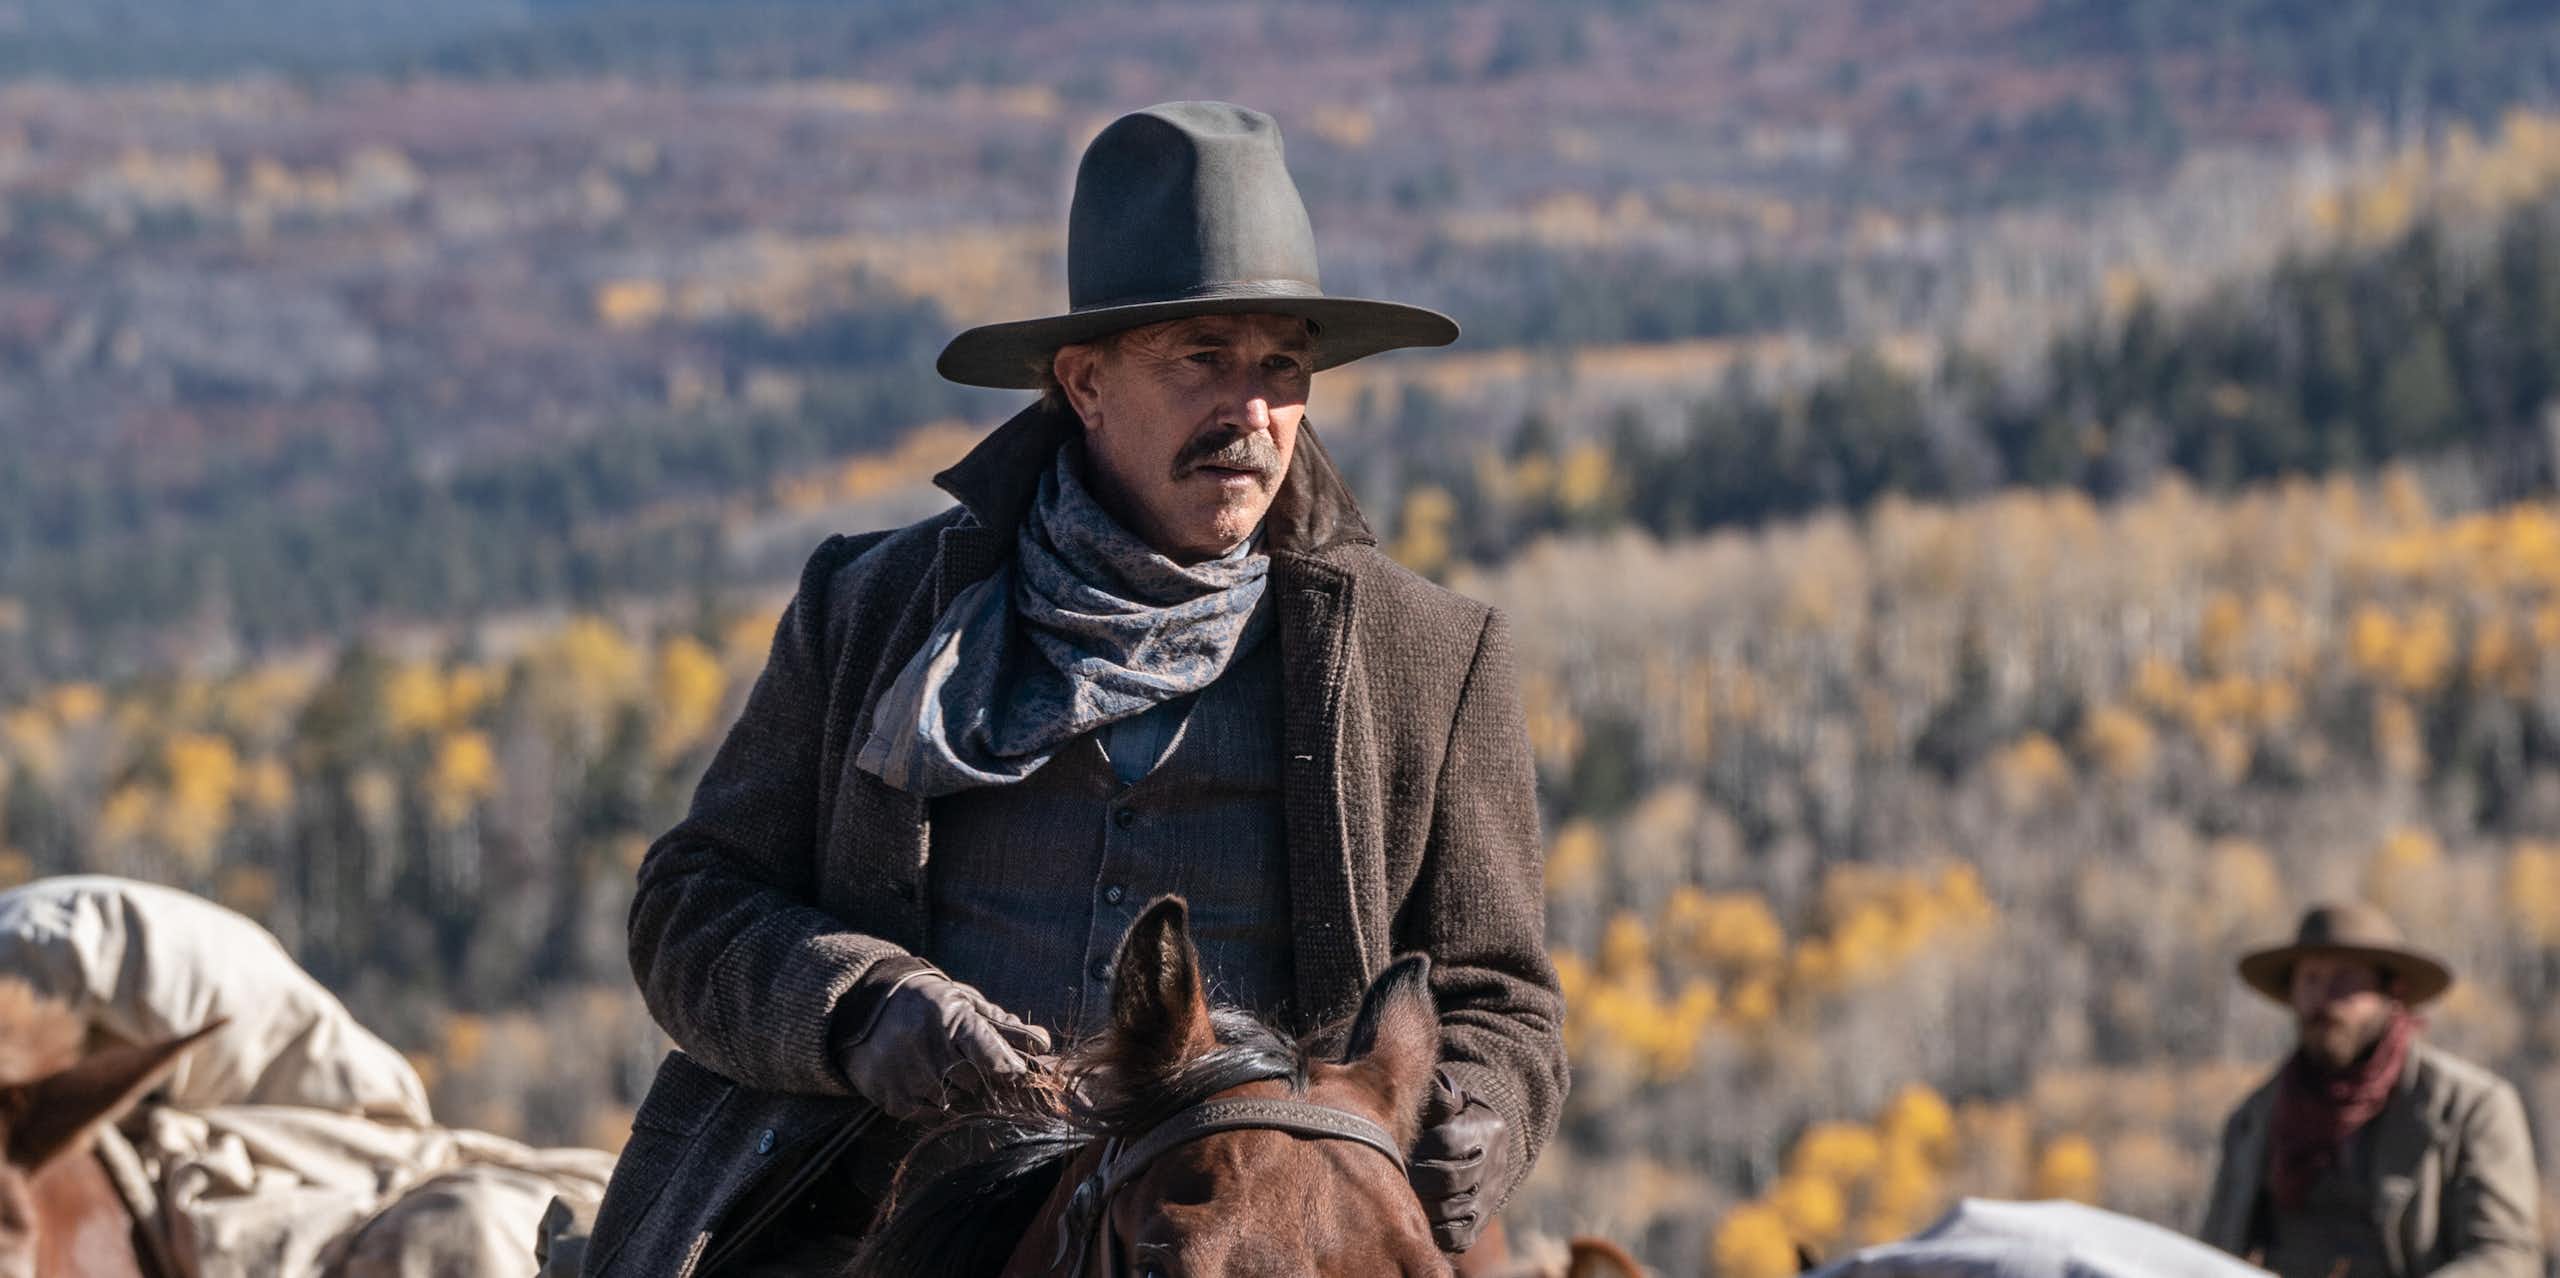 Kevin Costner in western clothes riding a horse